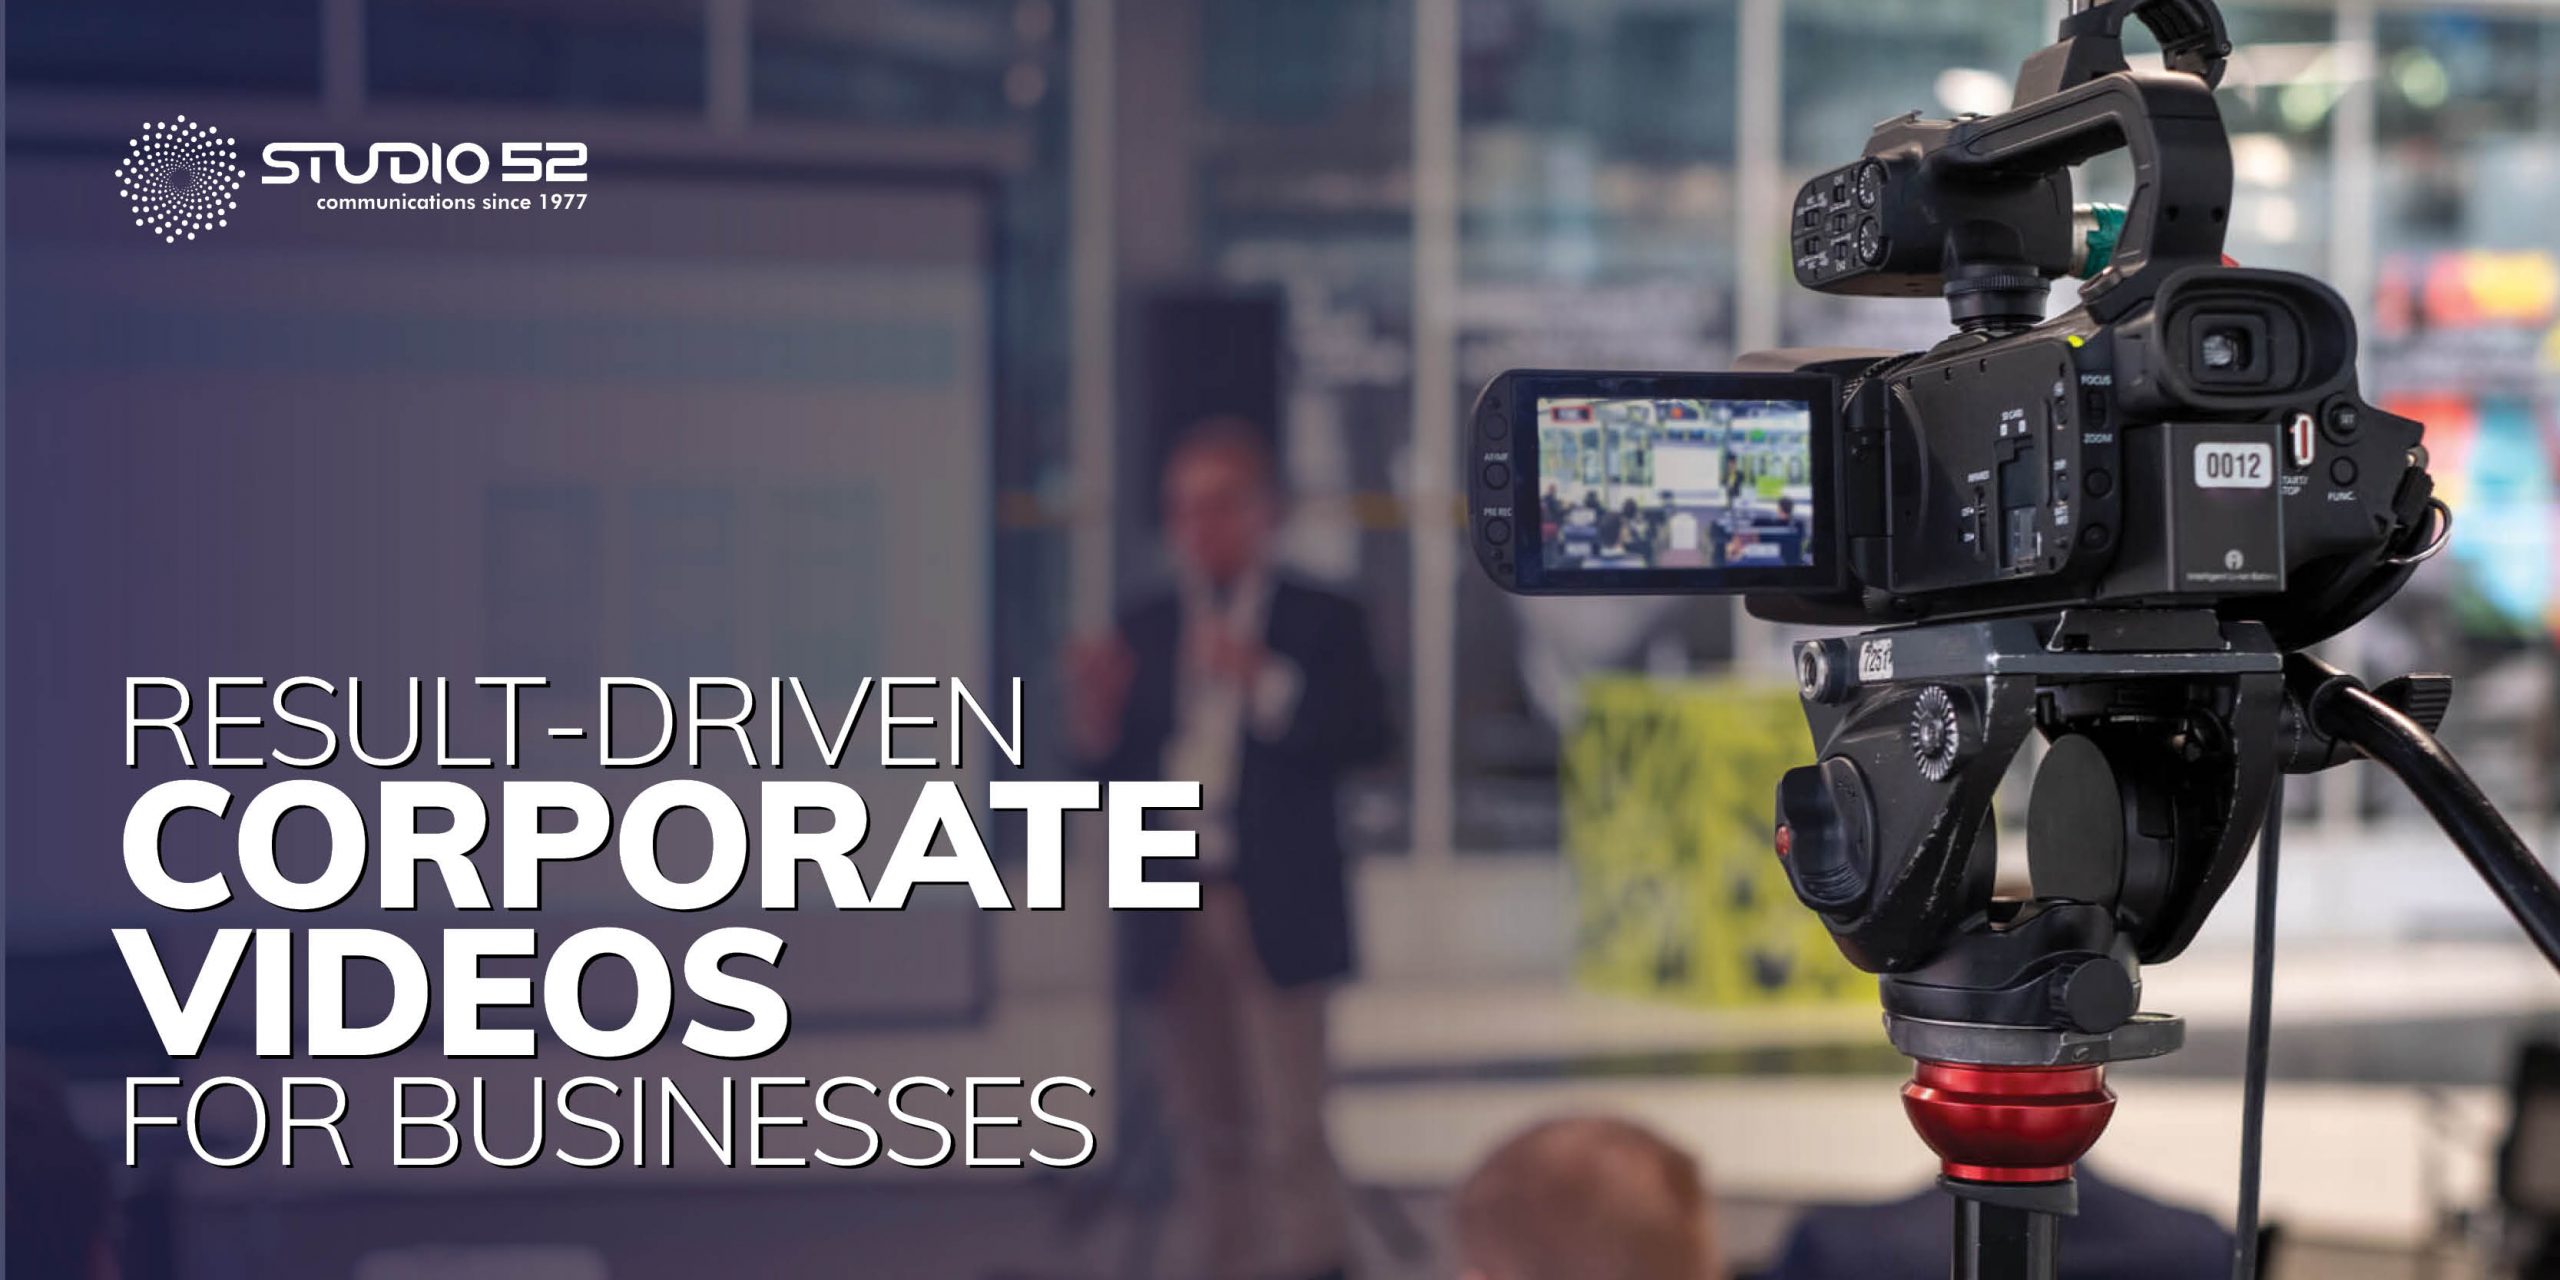 Result-driven Corporate Videos for Businesses - Studio 52